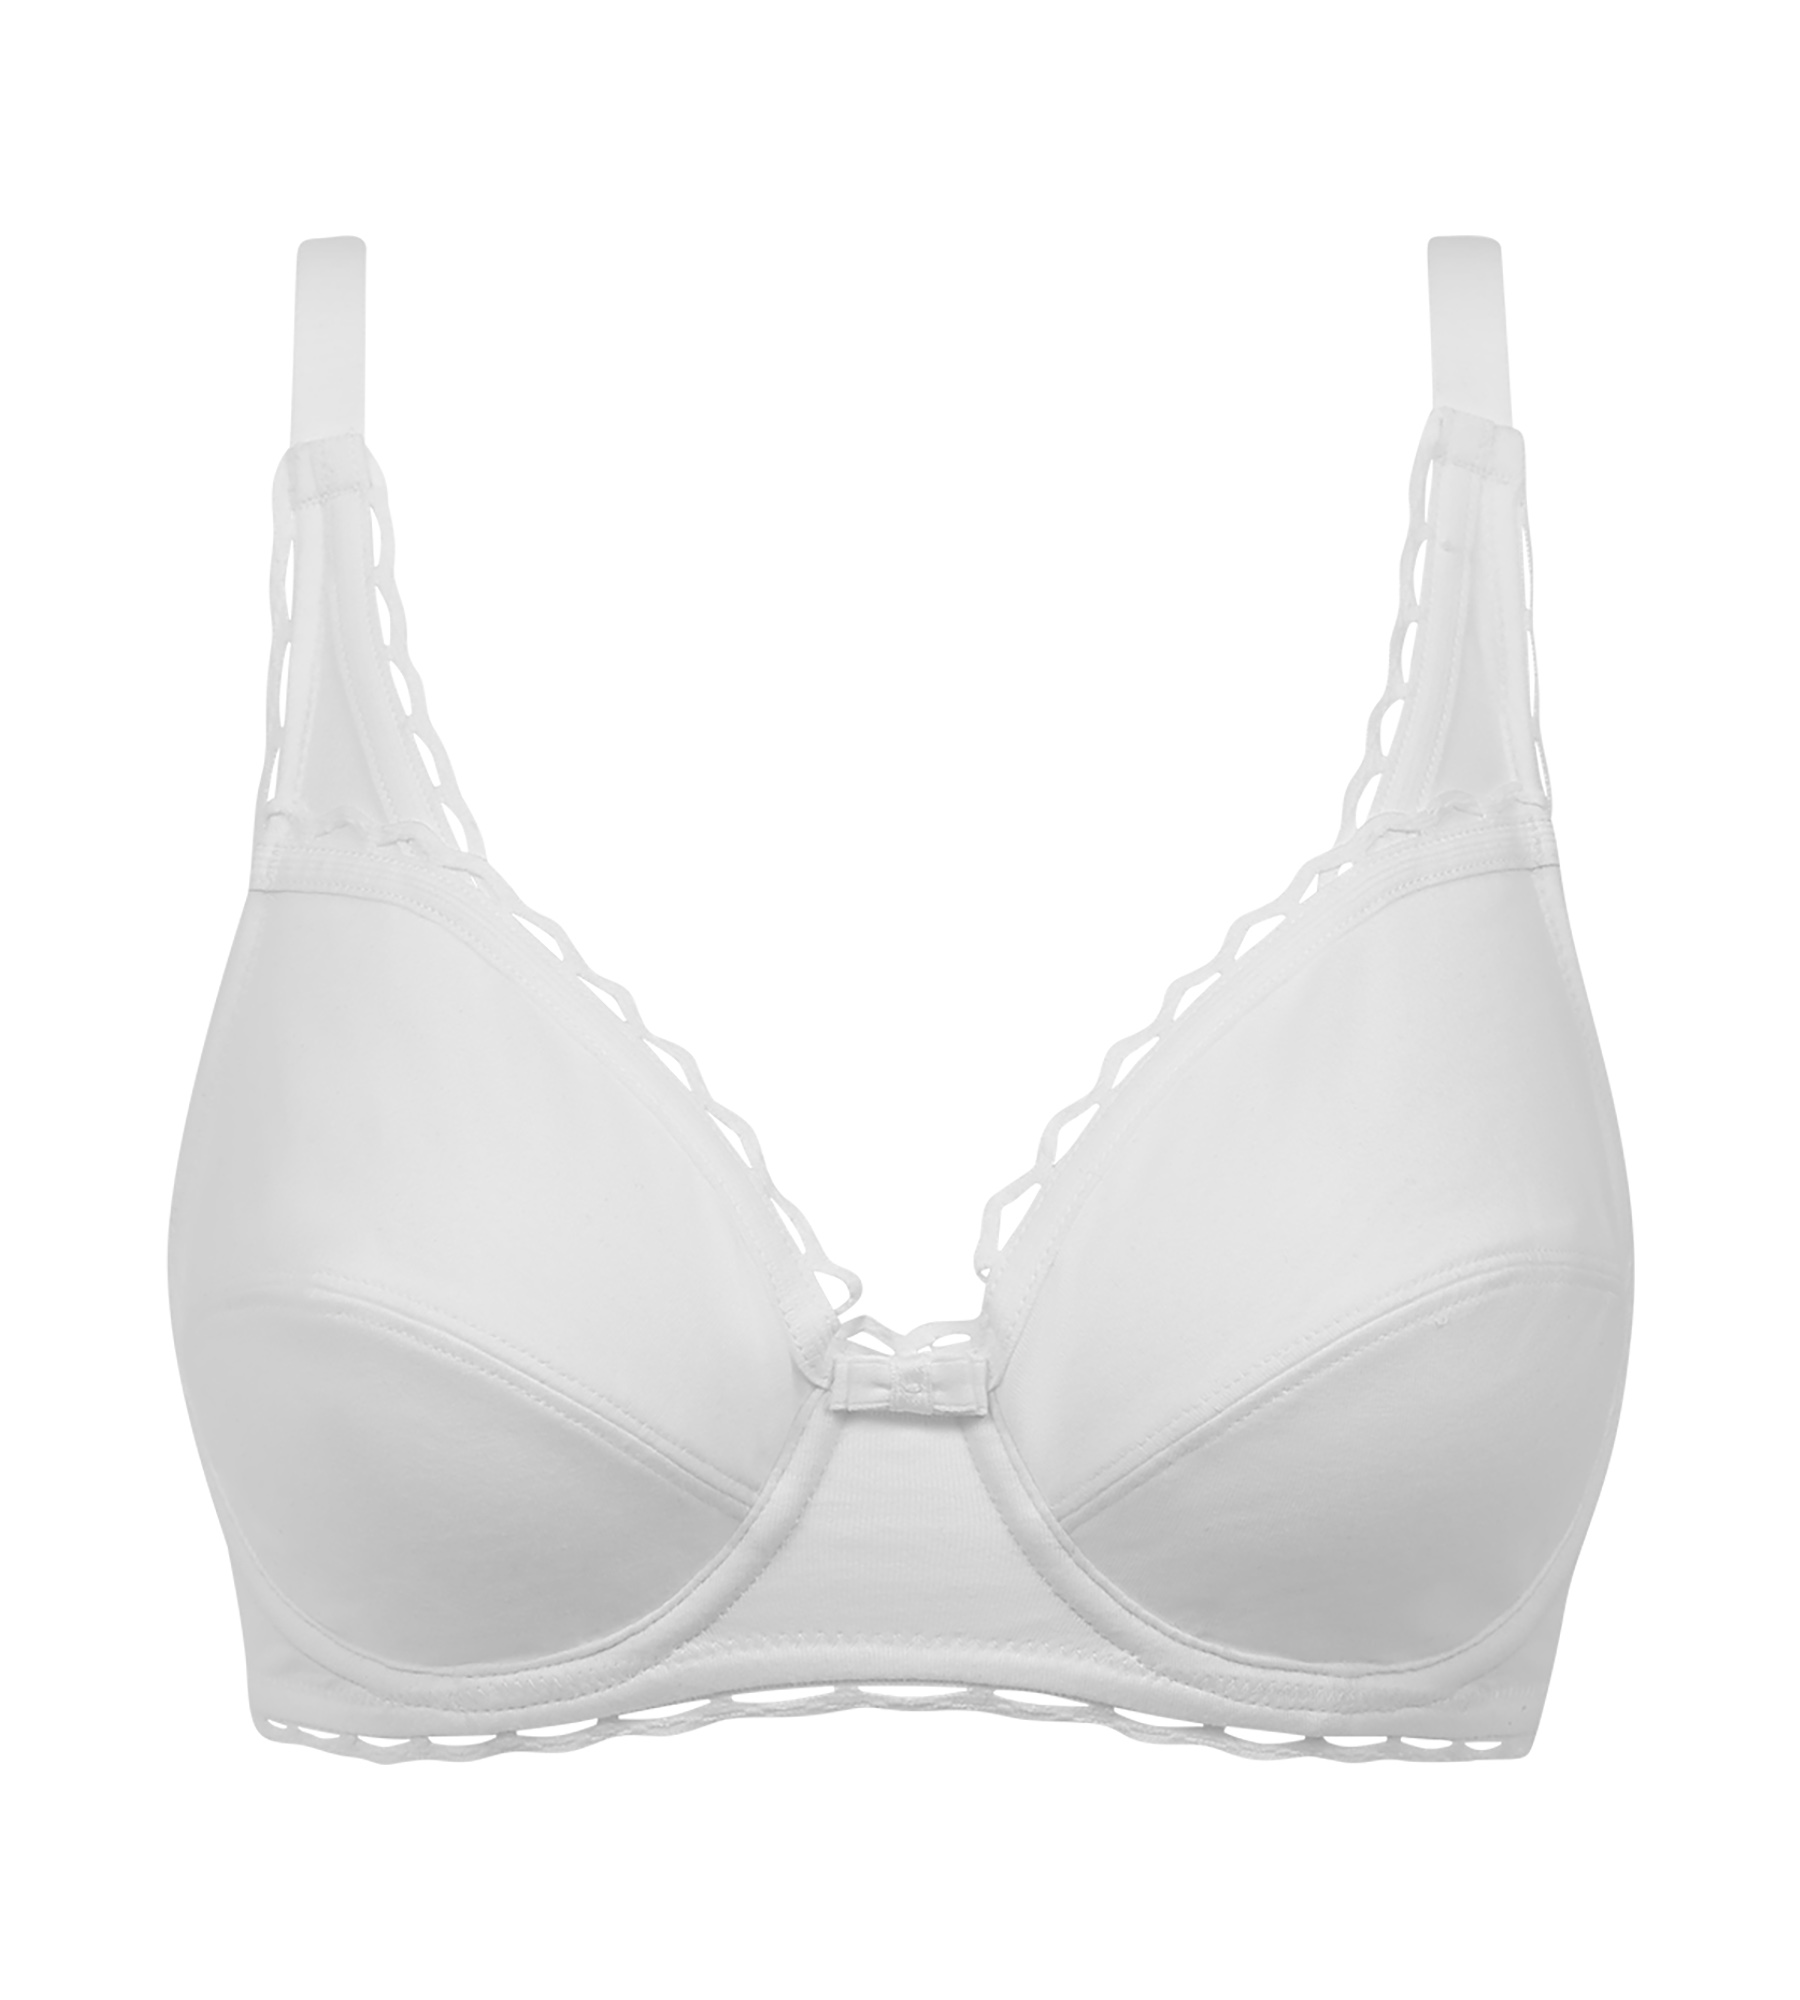 F CUP PUSHUP RACER BACK BRAS NWT SIZES 34/36/38/40/42/44 WITH UNDERWIRE –  Priordei l'oli de catalunya